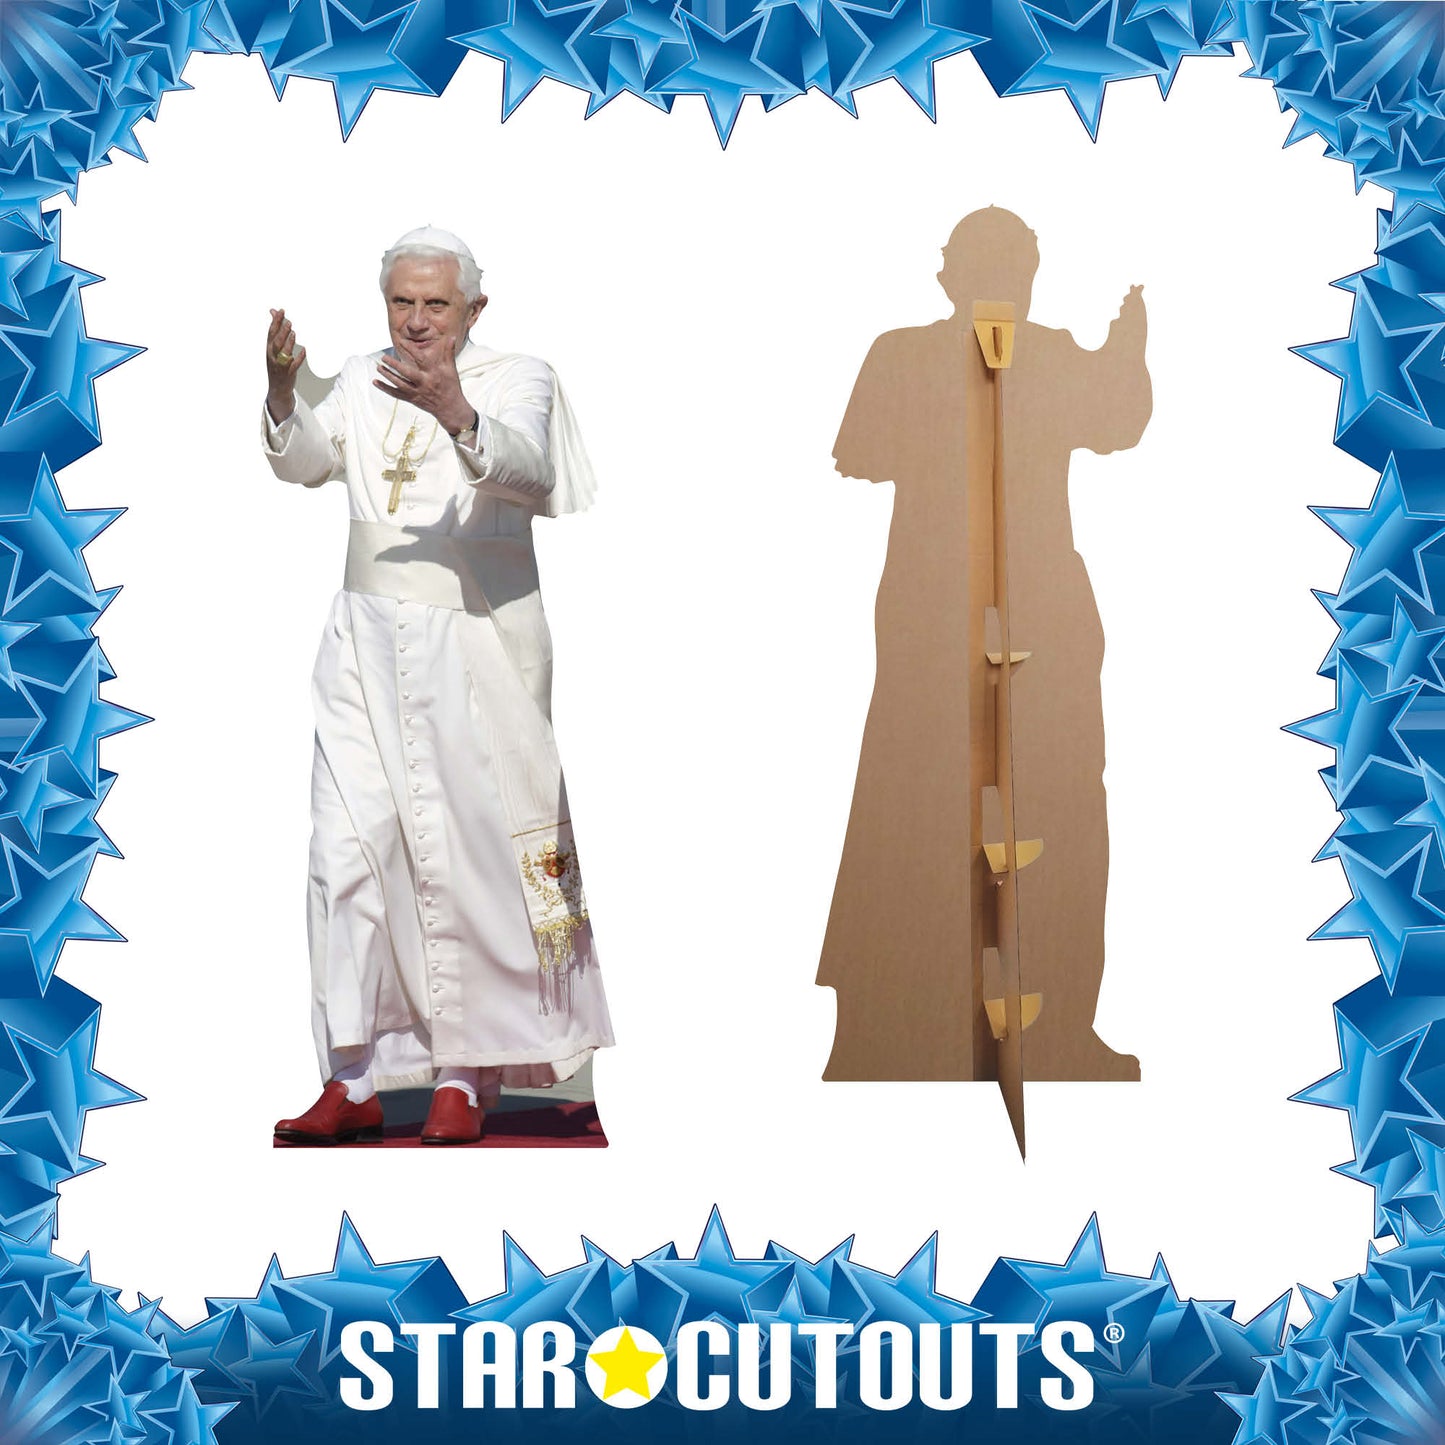 The Pope Cardboard Cut Out Height 181cm